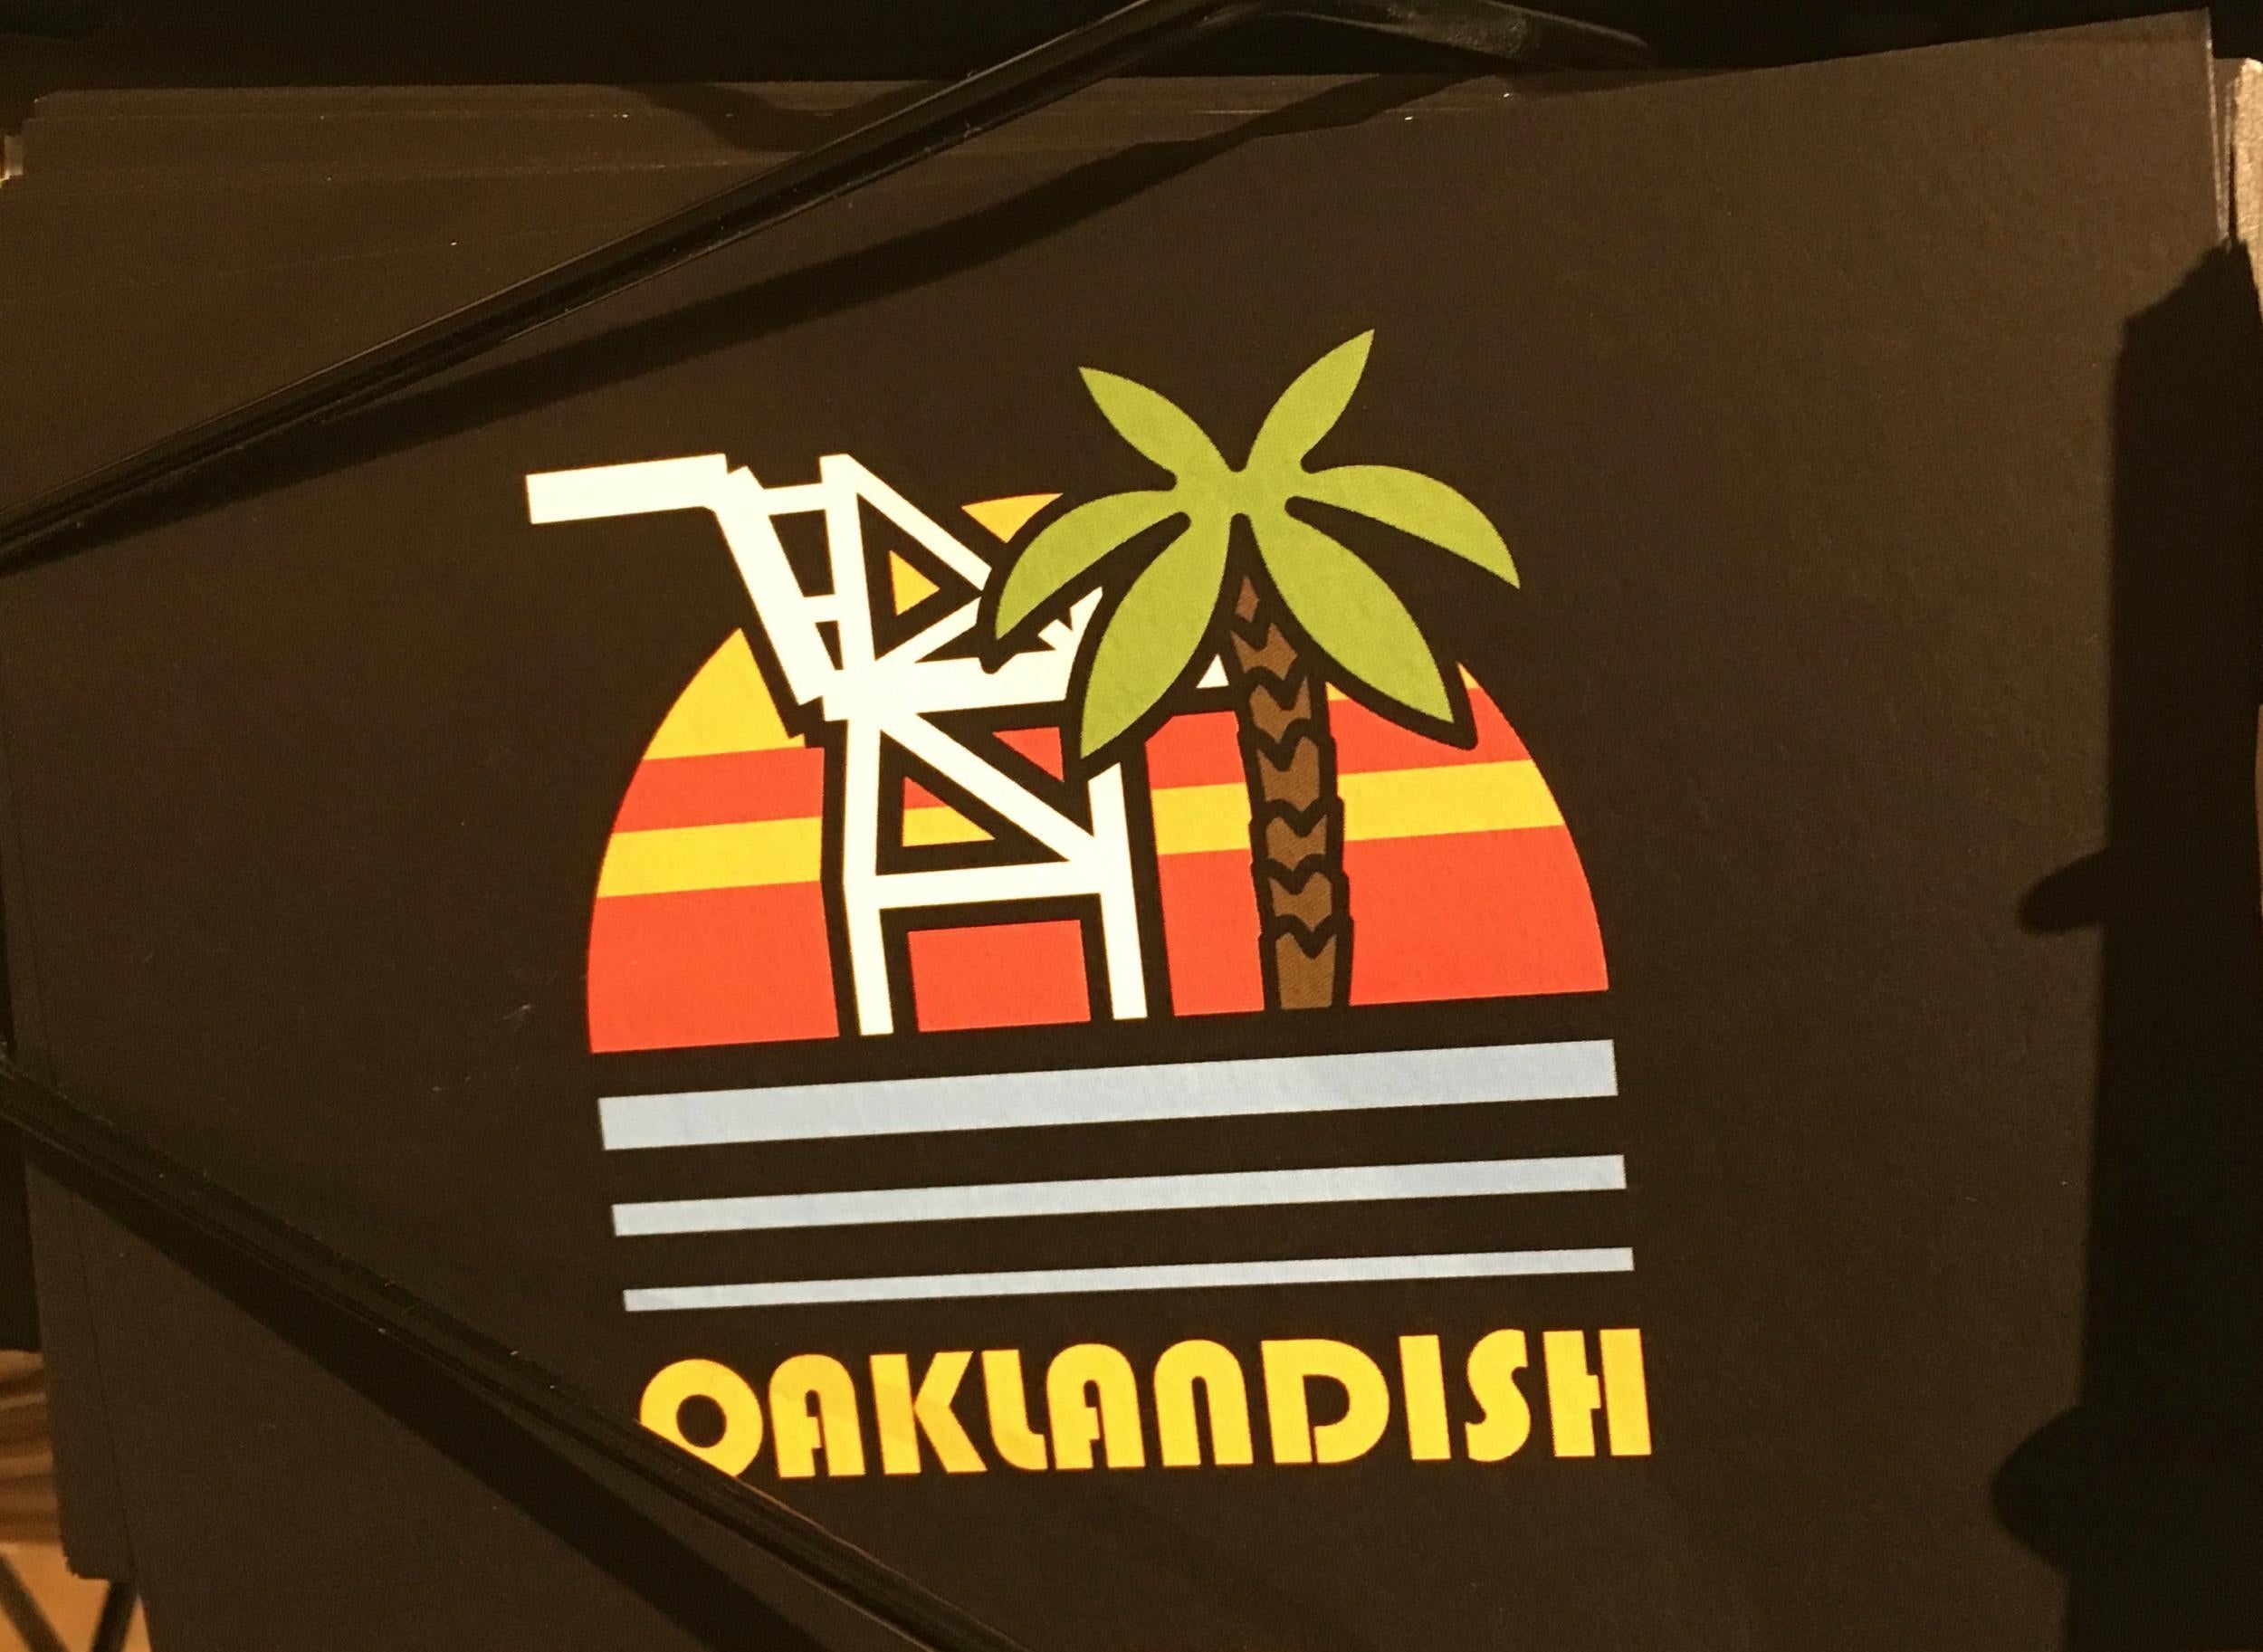 The Oaklandish store's Oakland apparel features down-to-earth designs